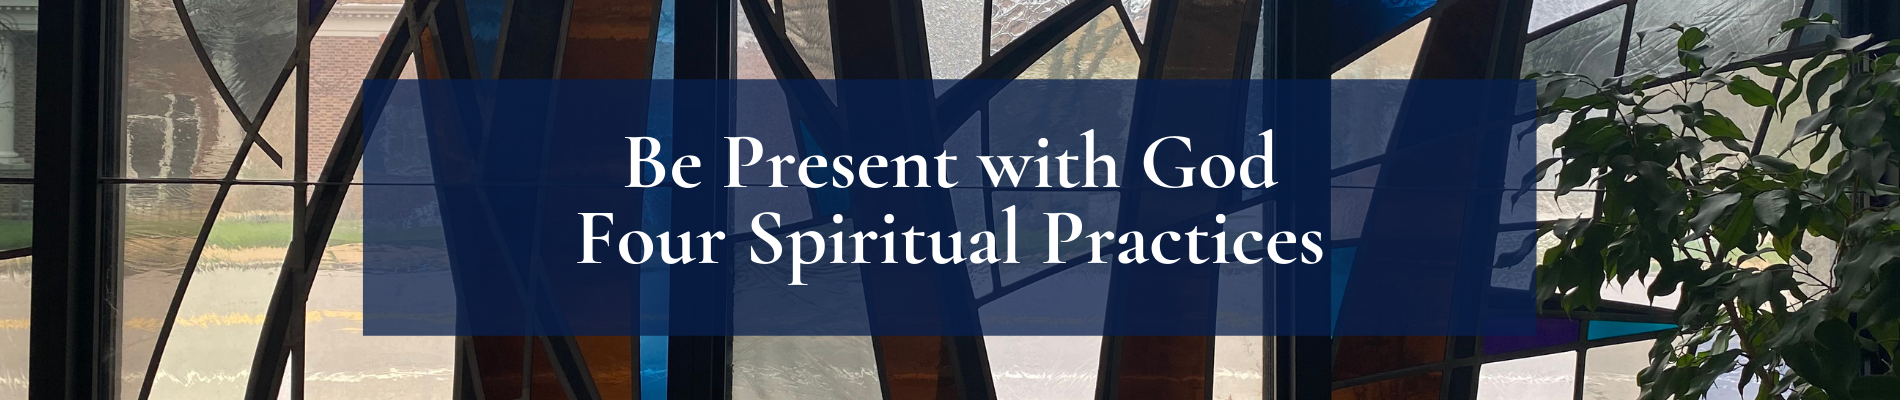 Be Present with God Four Spiritual Practices